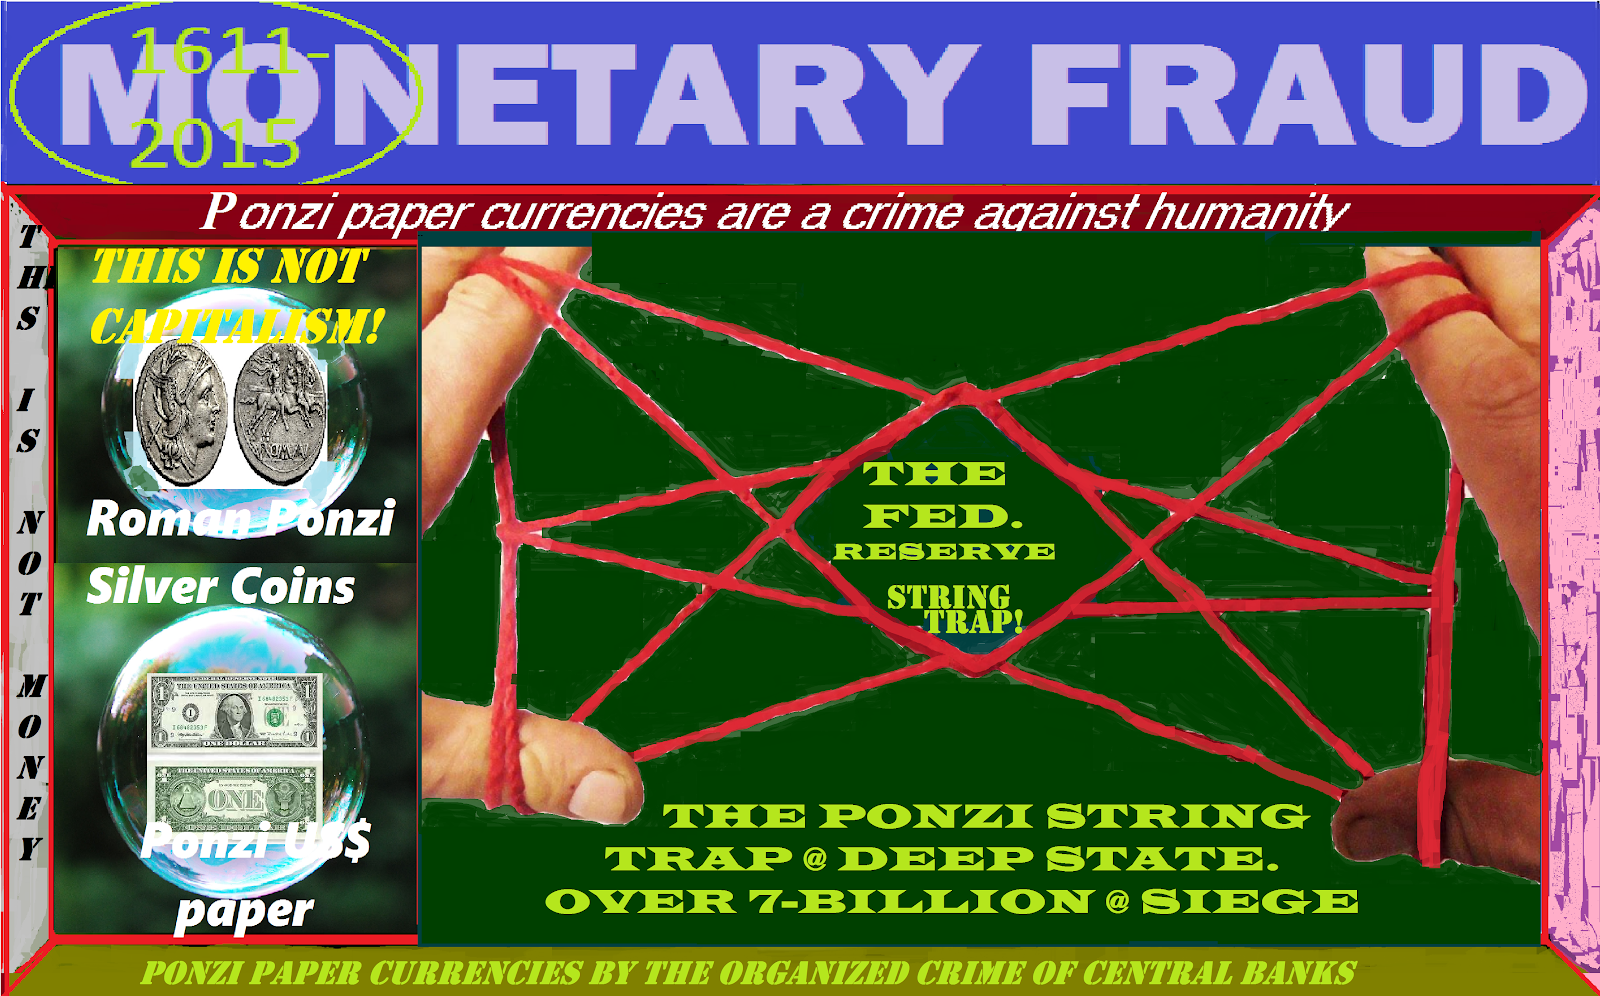 THE FEDERAL RESERVE STRING TRAP.